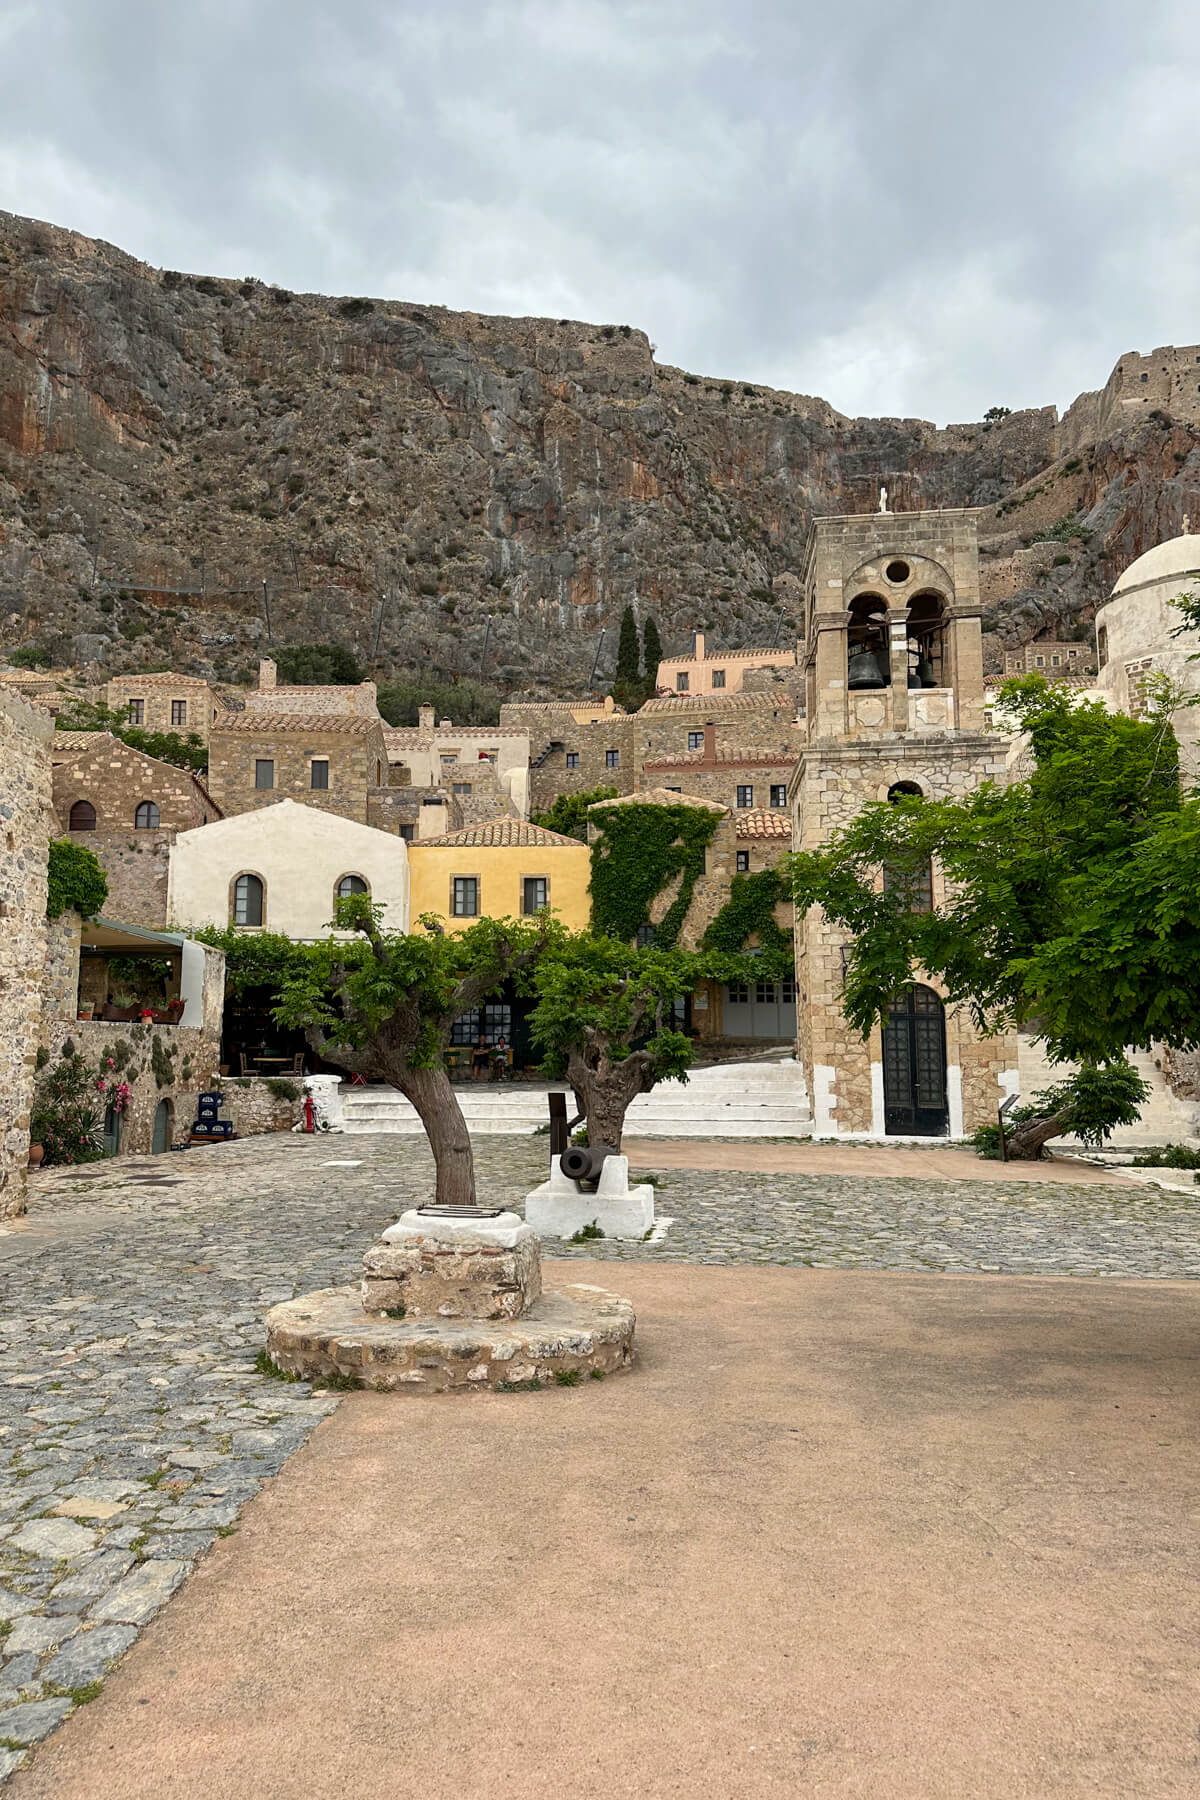 Lower town Monemvasia view with a tree at the center and several churches in the back